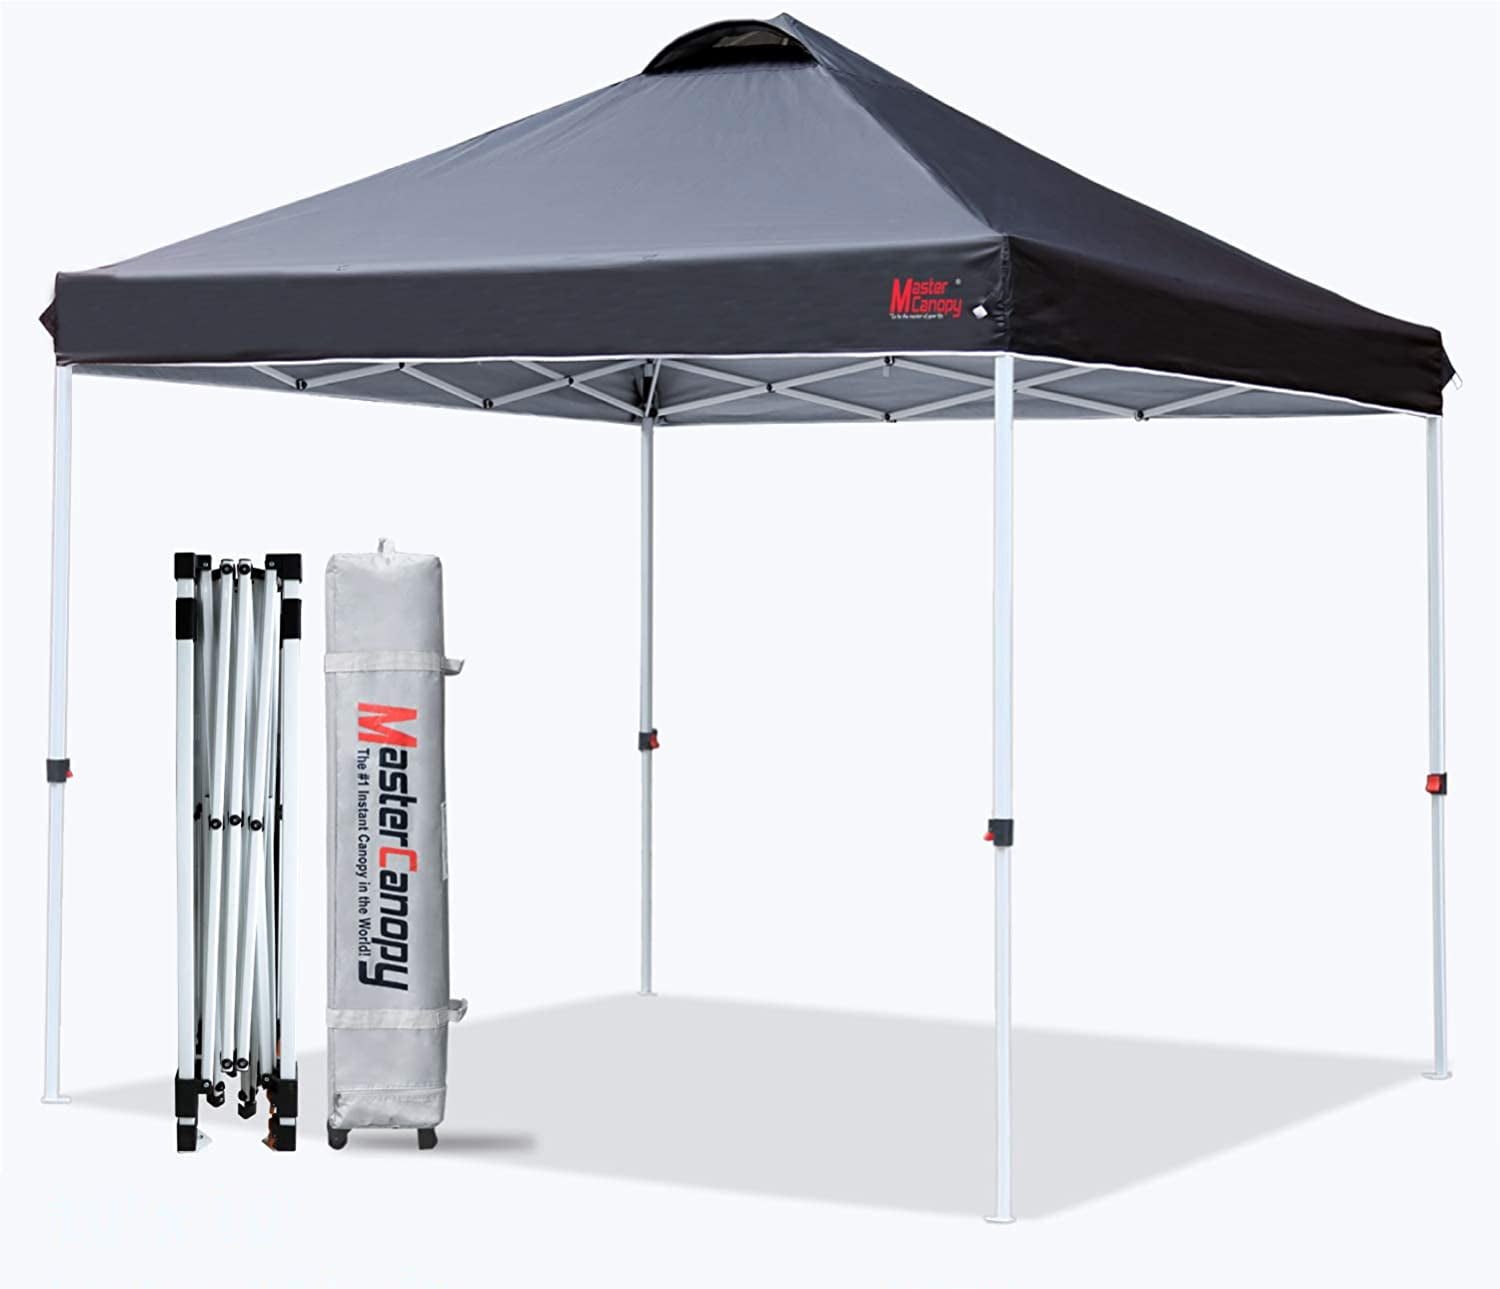 MASTERCANOPY Pop-up Canopy Tent 10x10 Commercial Instant Canopies with 4 Removable Side Walls and Roller Bag 10x10ft,White Bonus 4 SandBags 